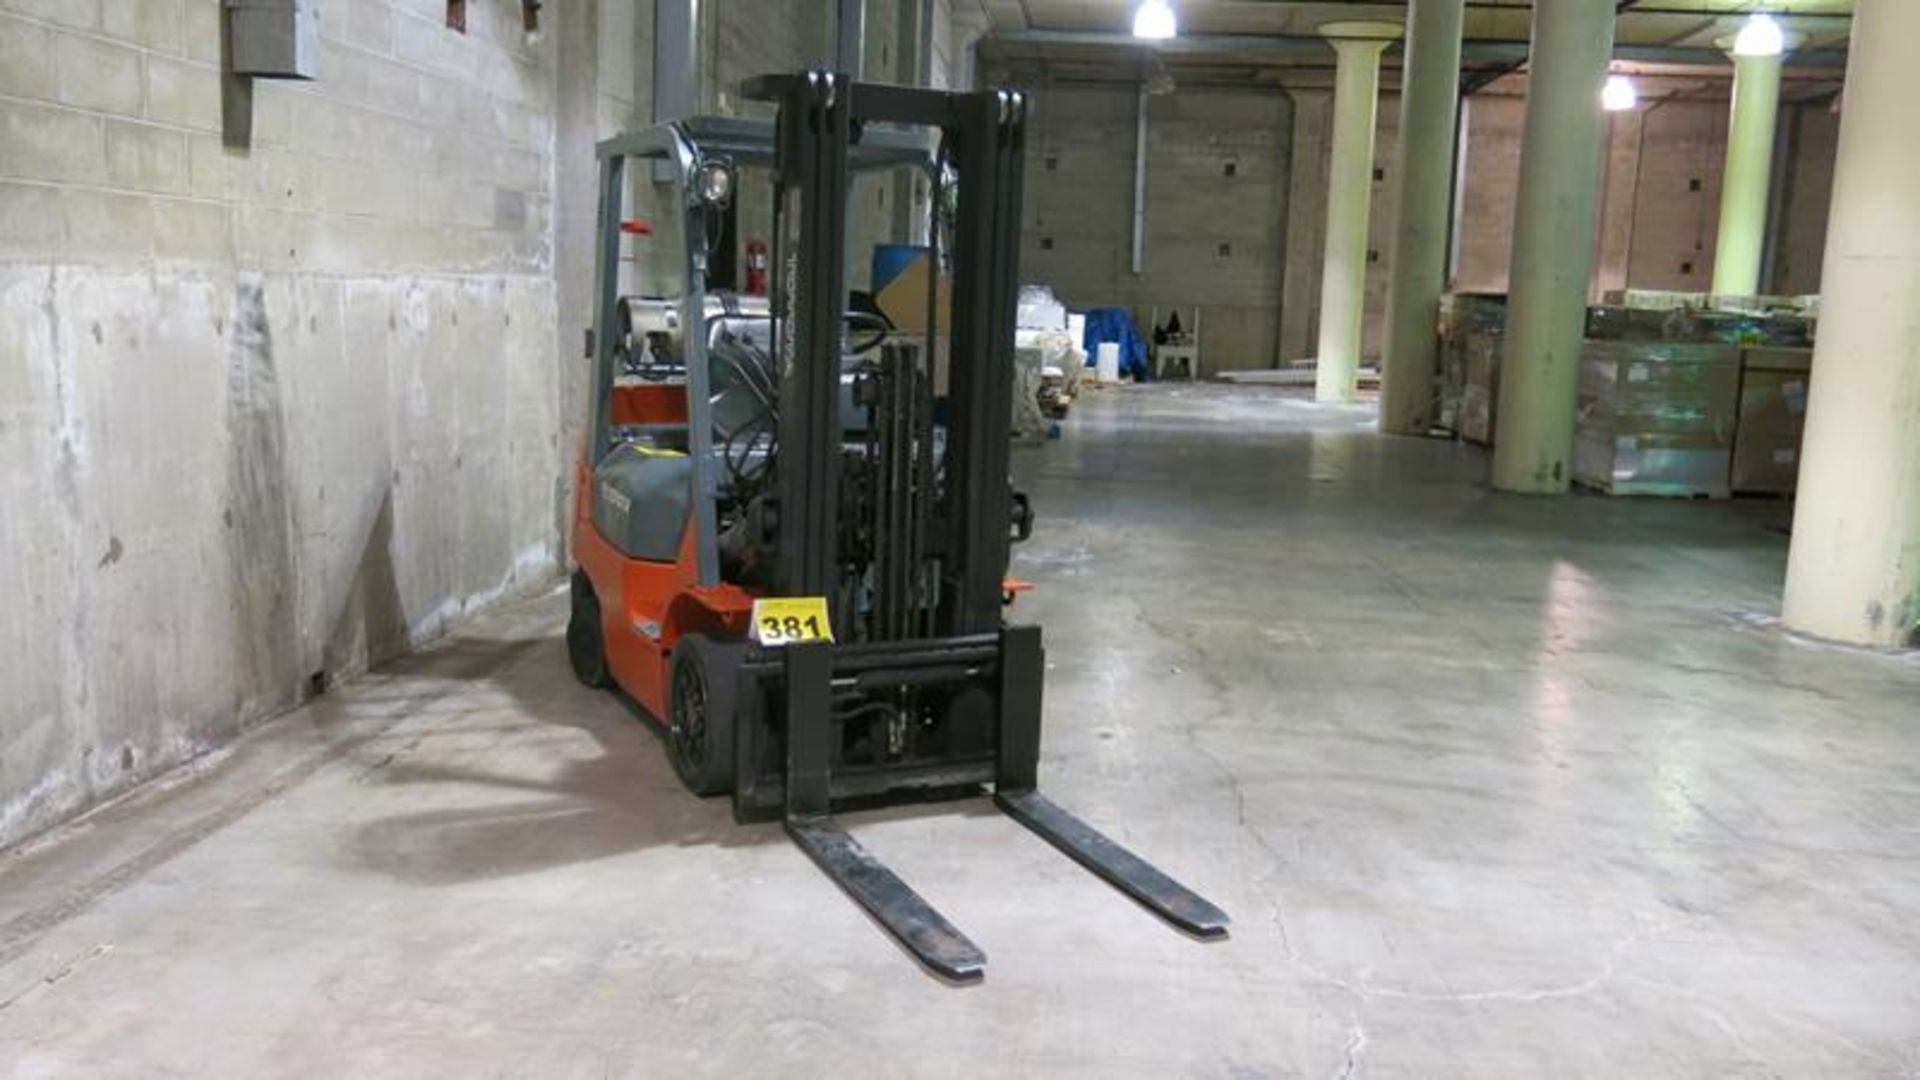 TOYOTA, 7FGCU25, 4,500 LBS, 3 STAGE, LPG FORKLIFT WITH SIDE SHIFT, 189" MAXIMUM LIFT, S/N 80139 - Image 3 of 8